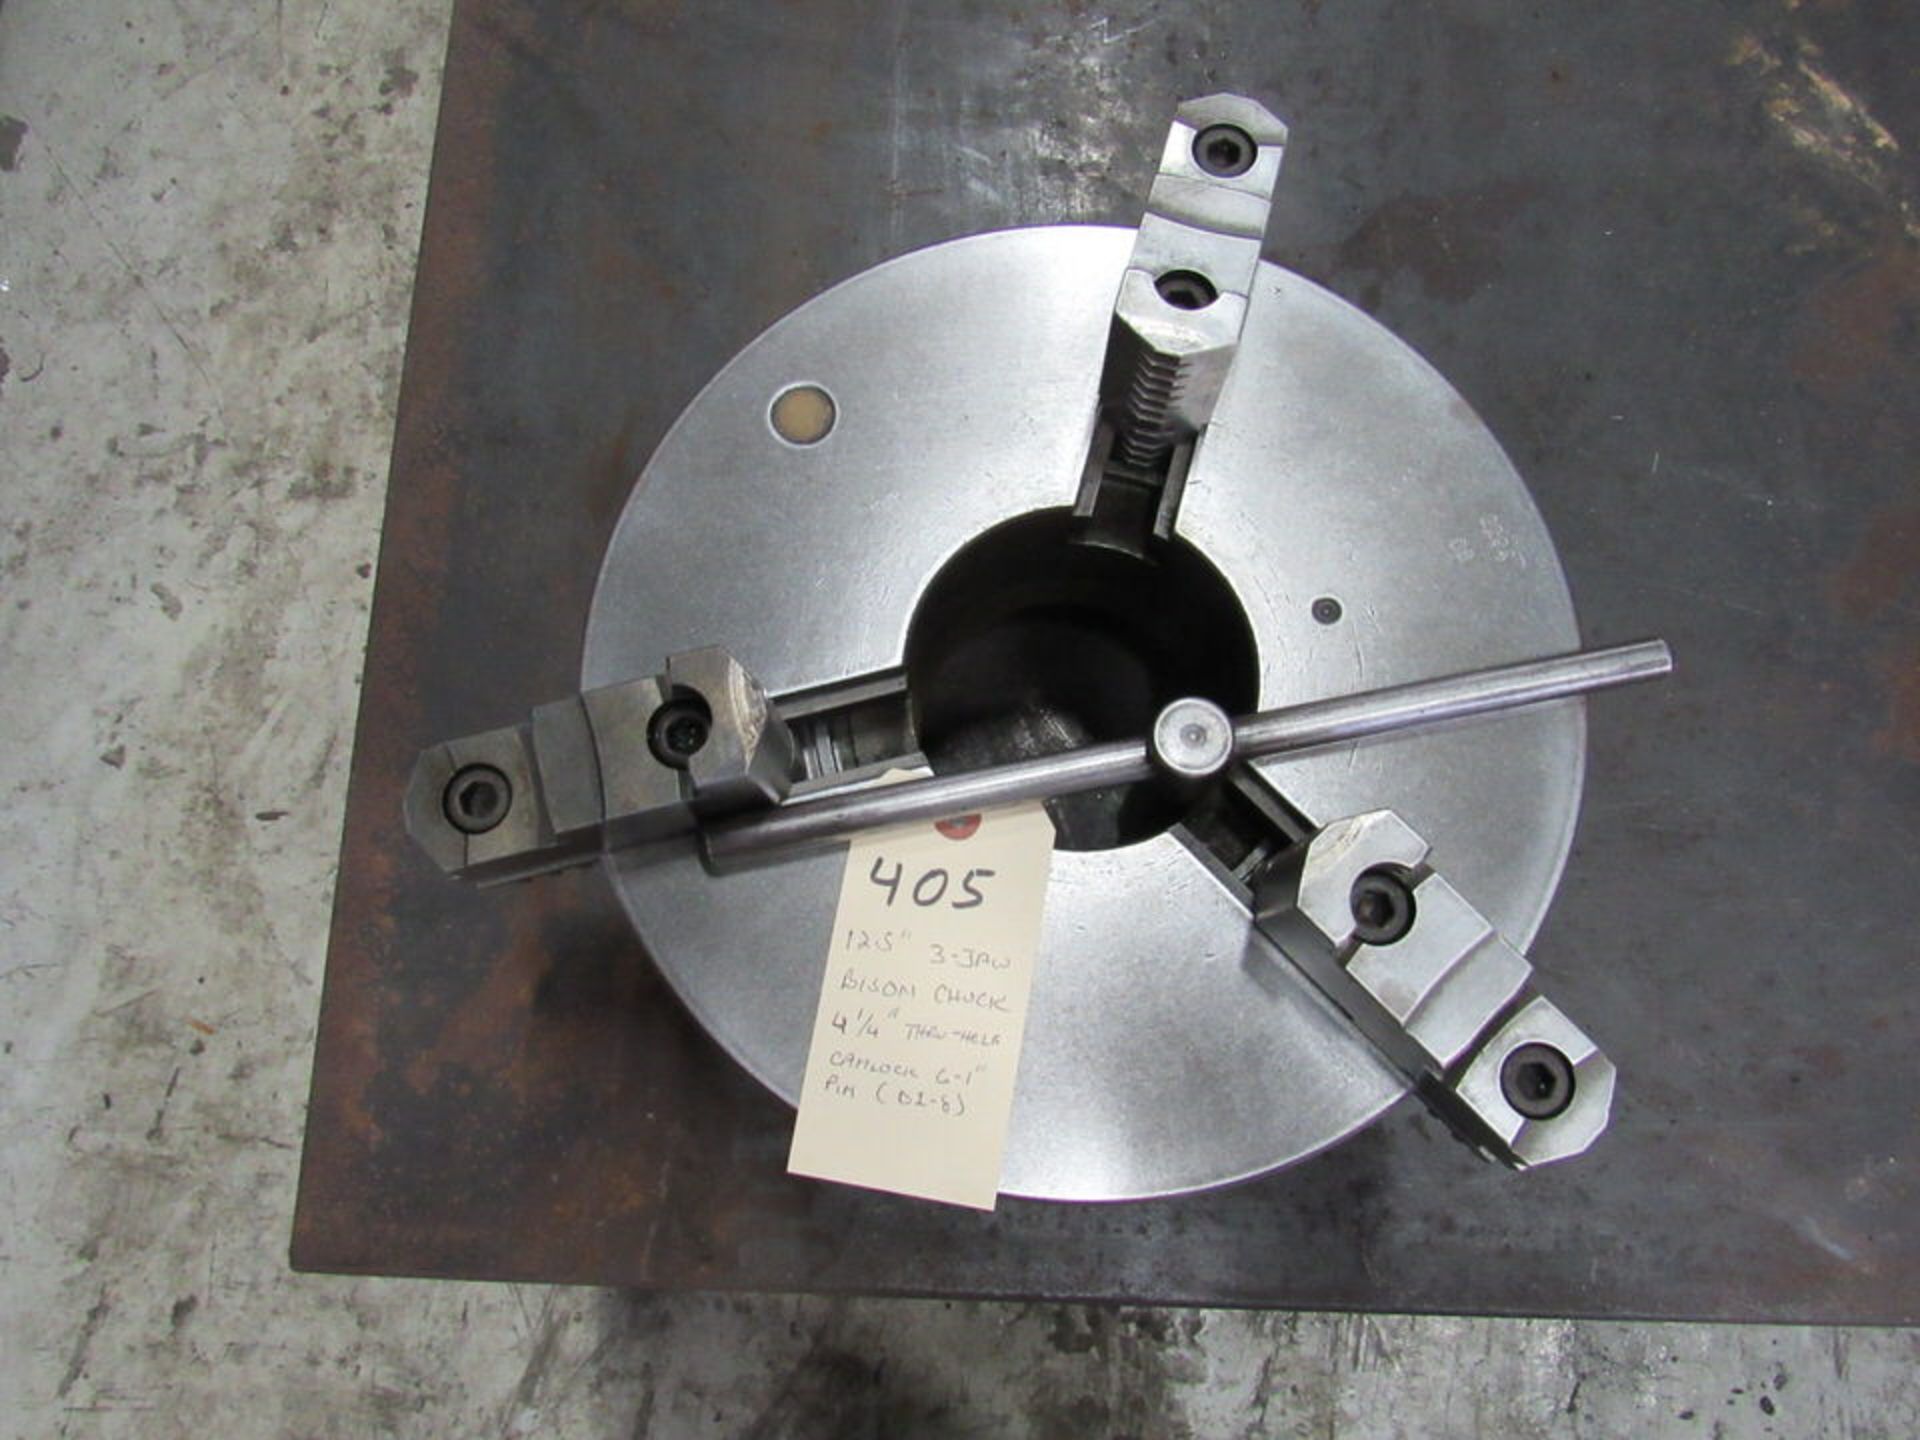 12.5" 3-Jaw Bison Chuck, 4.25" through hole, camlock 6 - 1" pin (D1-8), S/N NA (LOCATION: 3603 Melva - Image 2 of 3